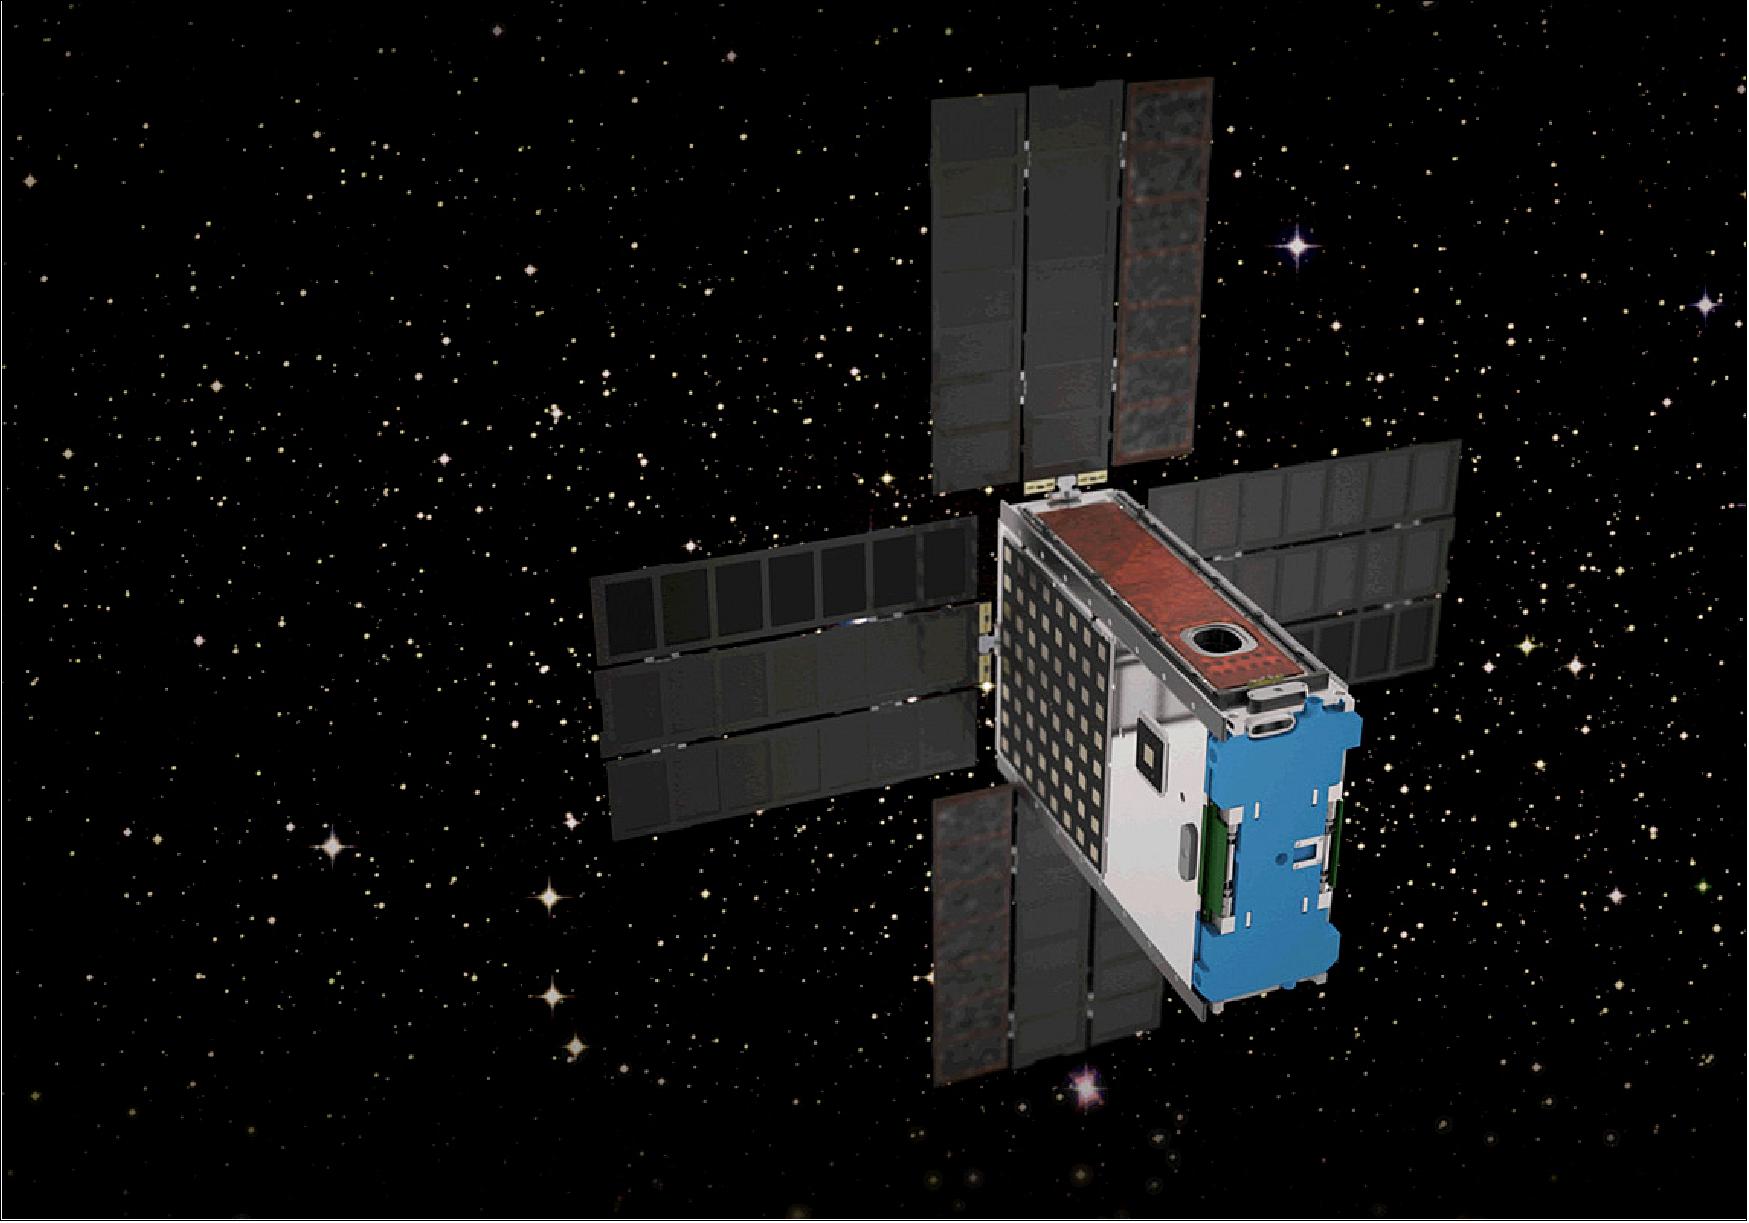 Figure 7: Artist's rendition of the deployed BioSentinel spacecraft aiming to investigate the pernicious effects of deep-space radiation (image credit: NASA)